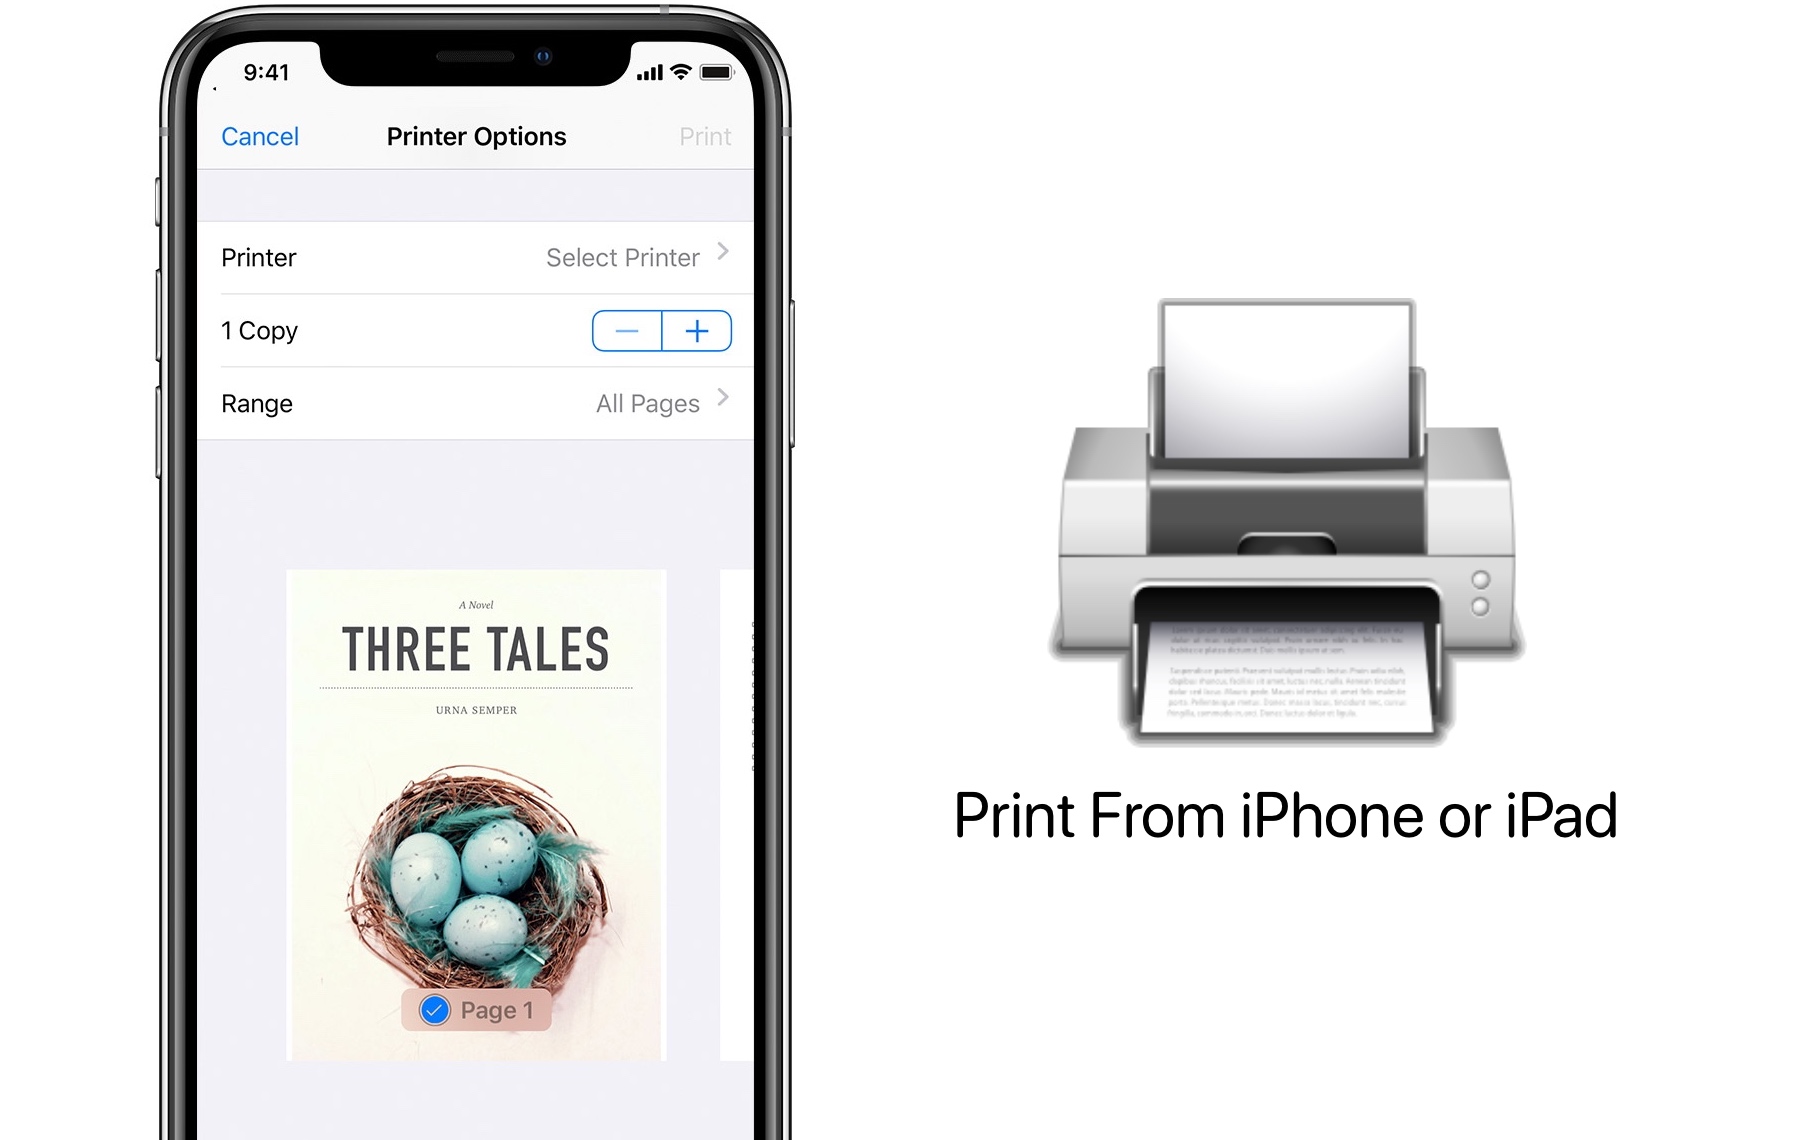 sorg selvmord Arkæolog How To Print From iPhone Or iPad Directly - iOS Hacker